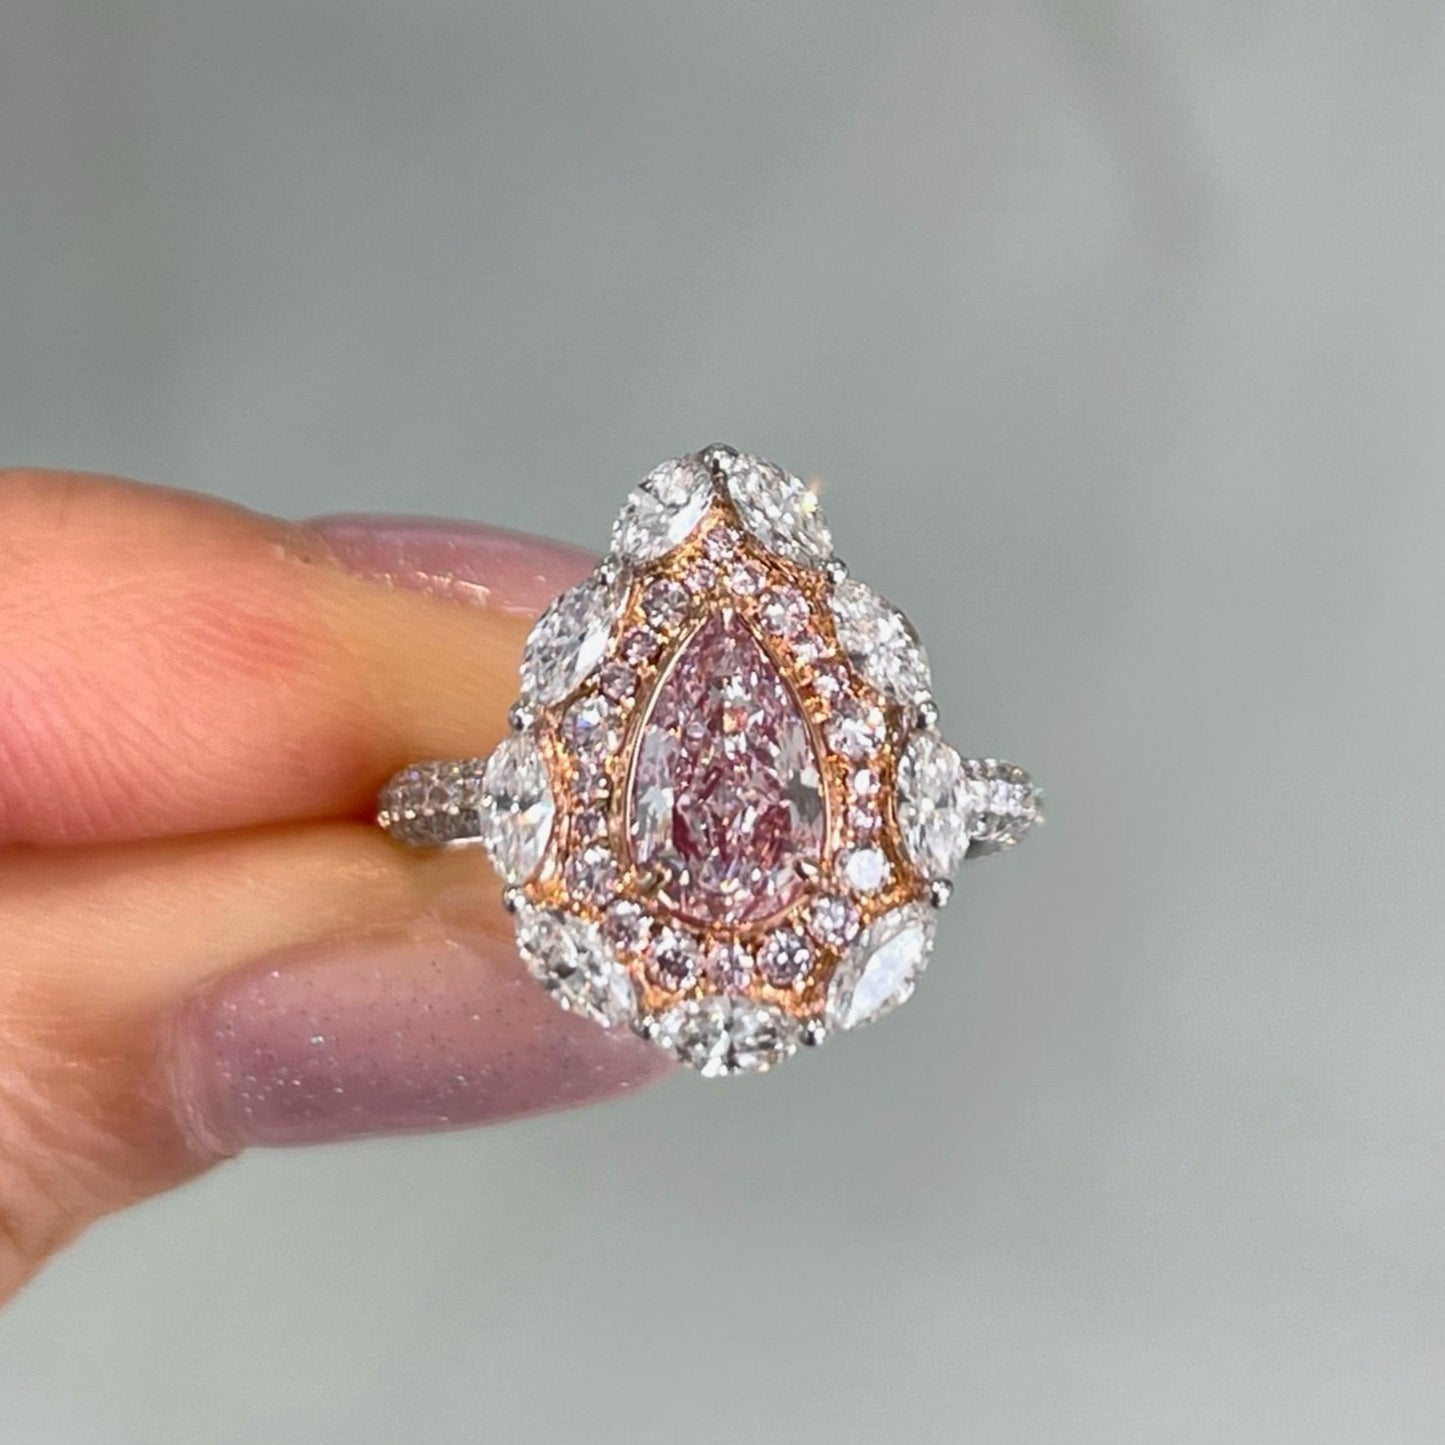 Pink pear diamond engagement ring. Designed for its sweet pink elegance. Look further into our pink diamond collection to find your dream diamond ring.